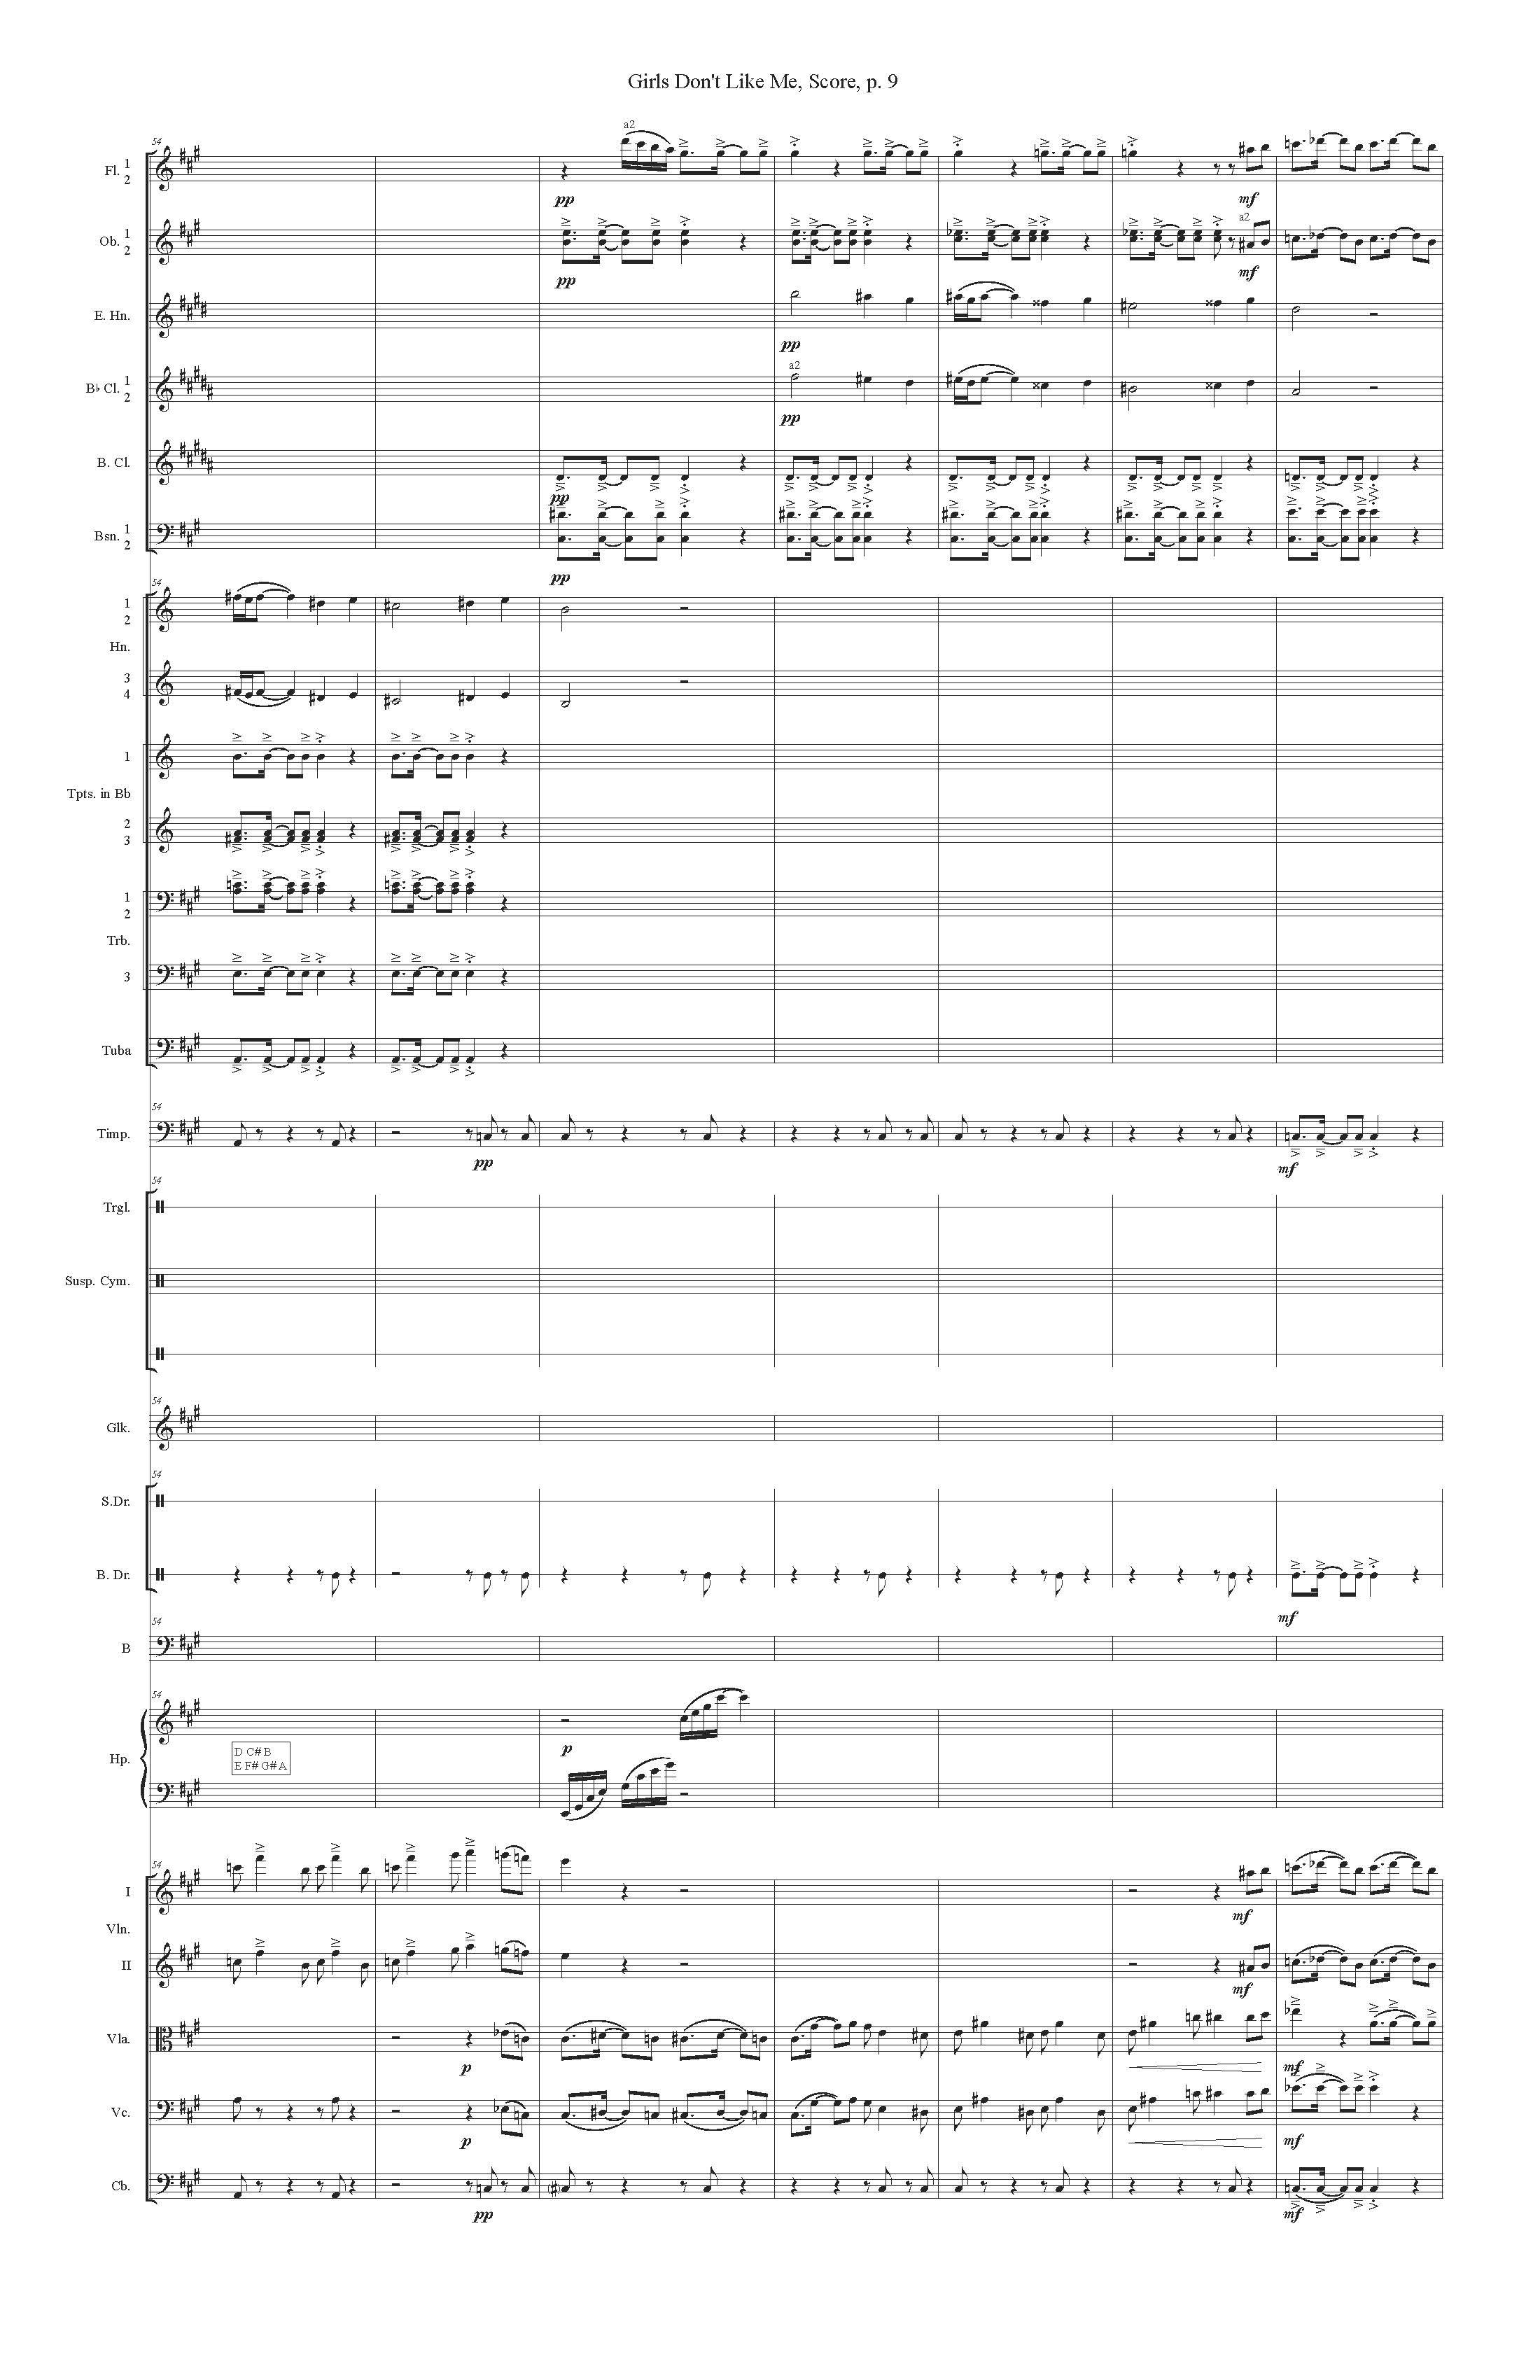 GIRLS DON'T LIKE ME ORCH - Score_Page_09.jpg